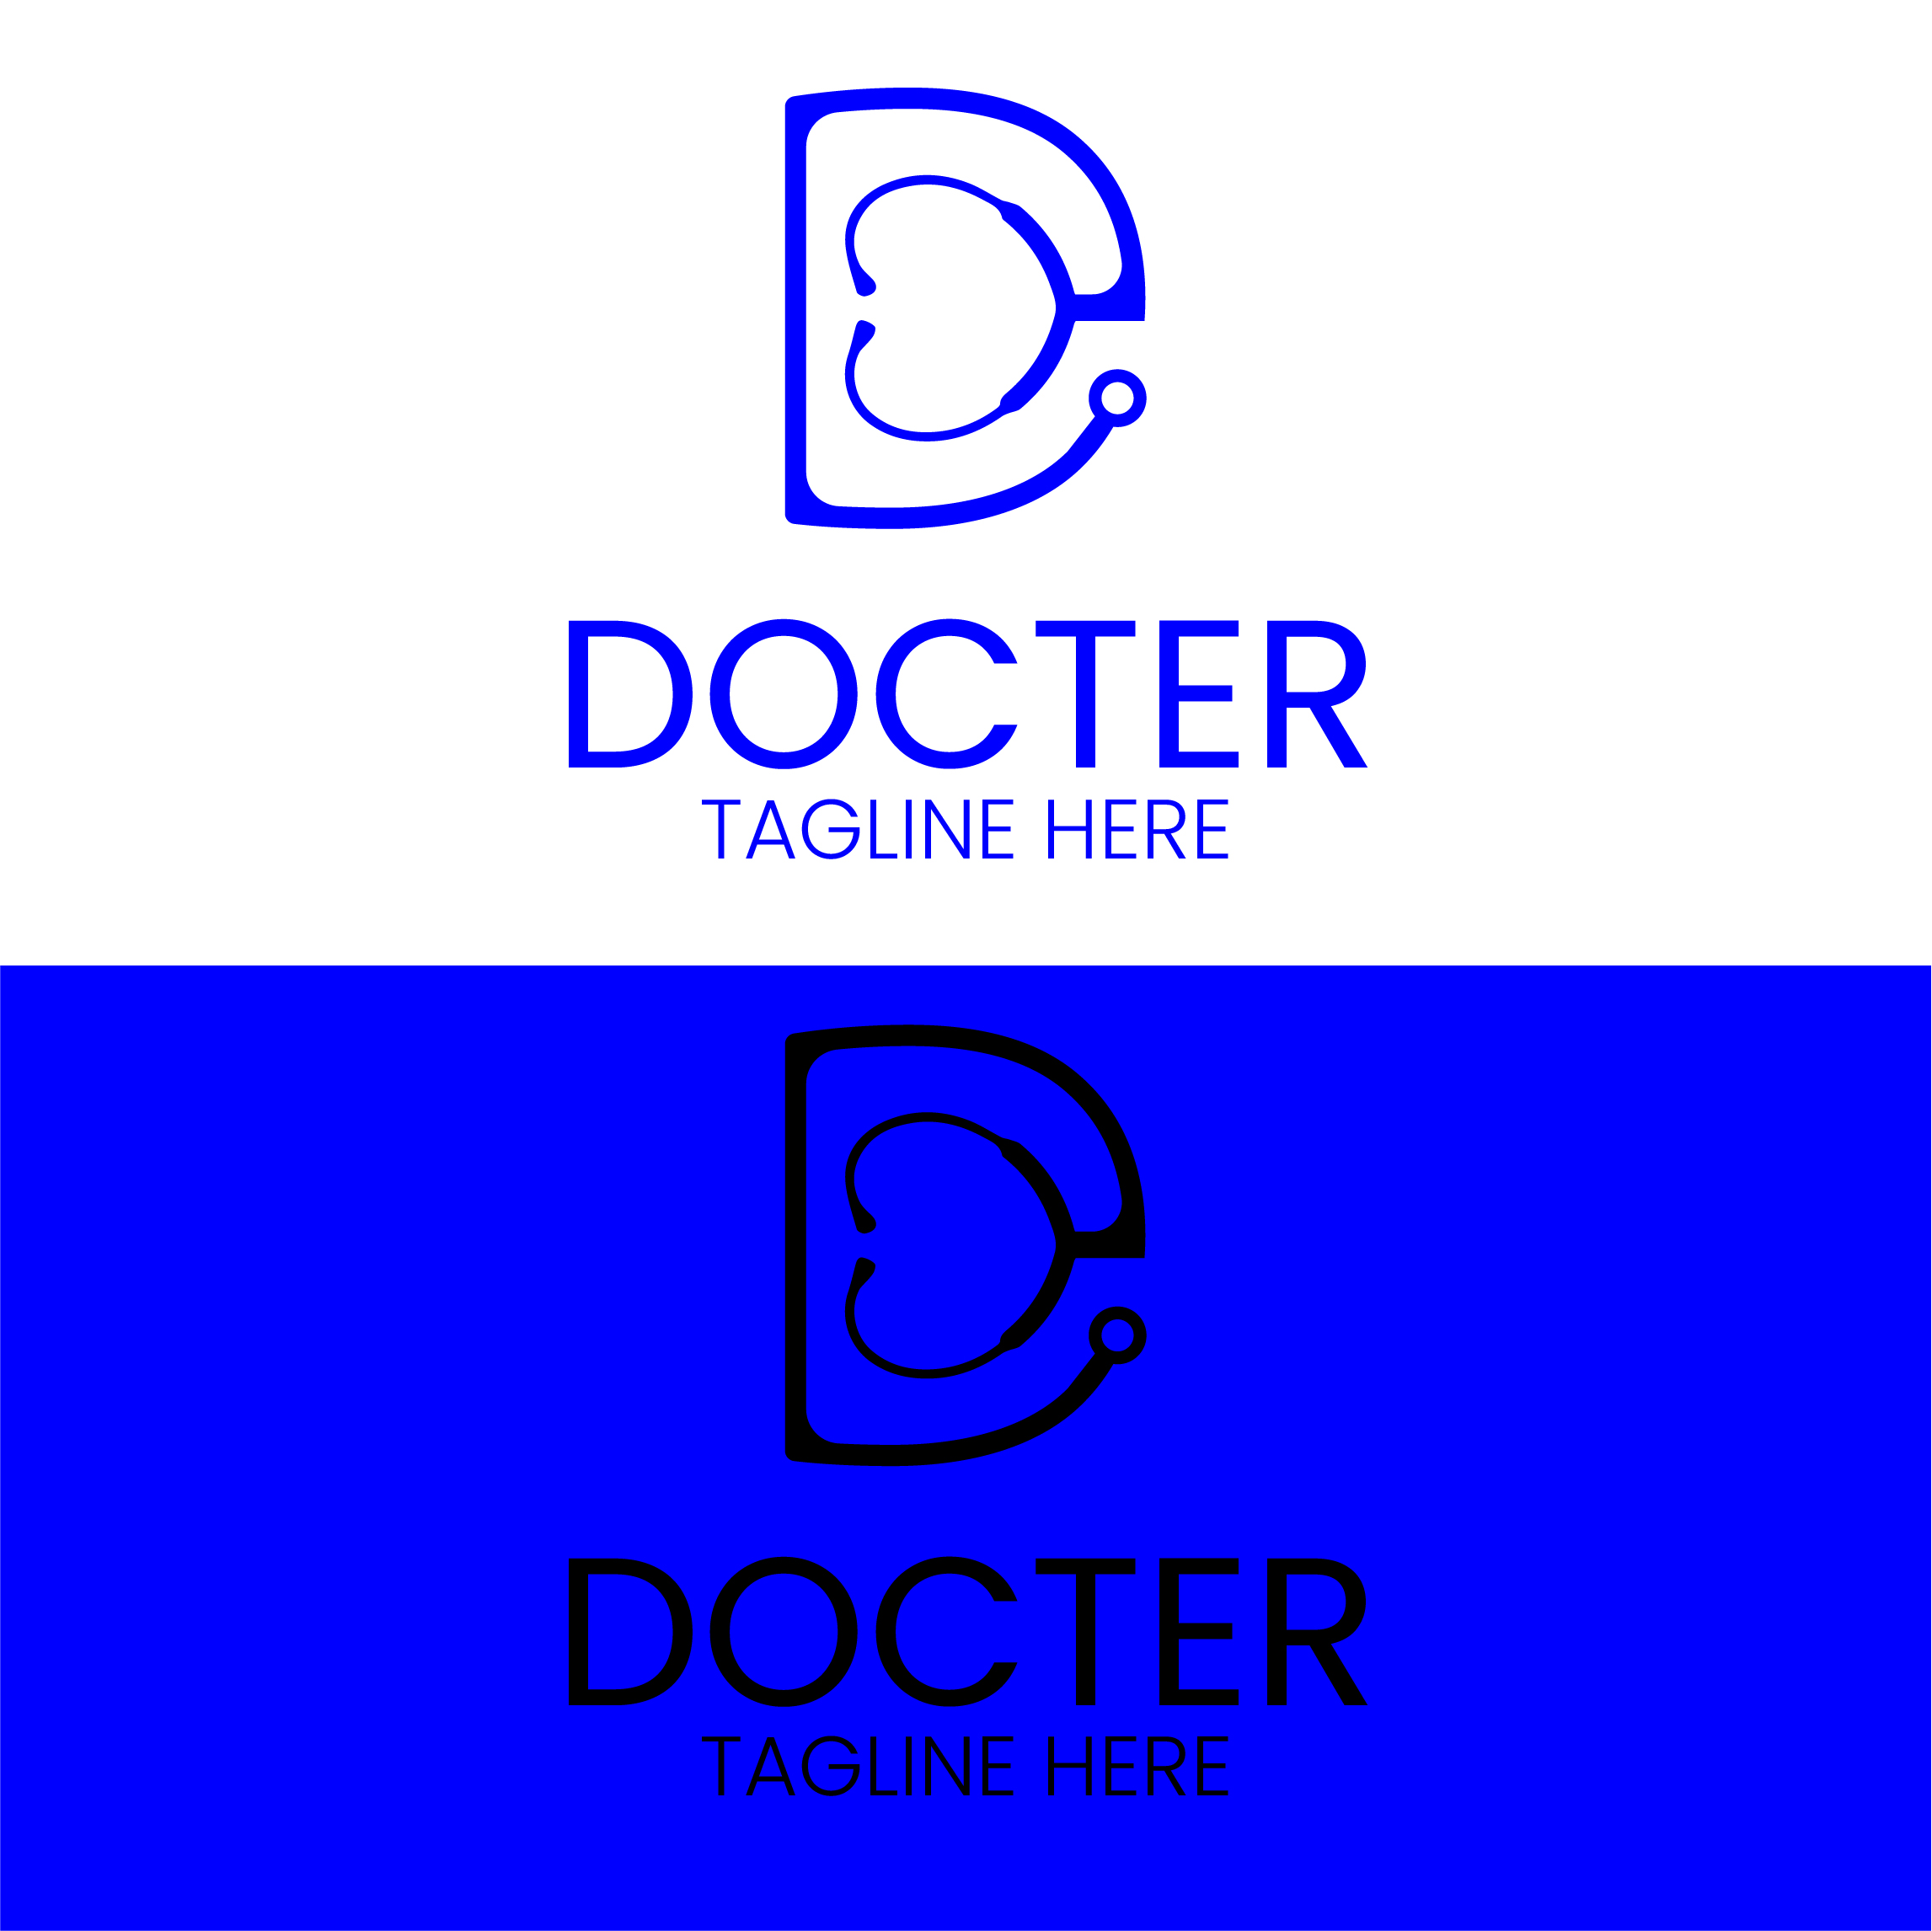 Blue and white logo with the letter d.